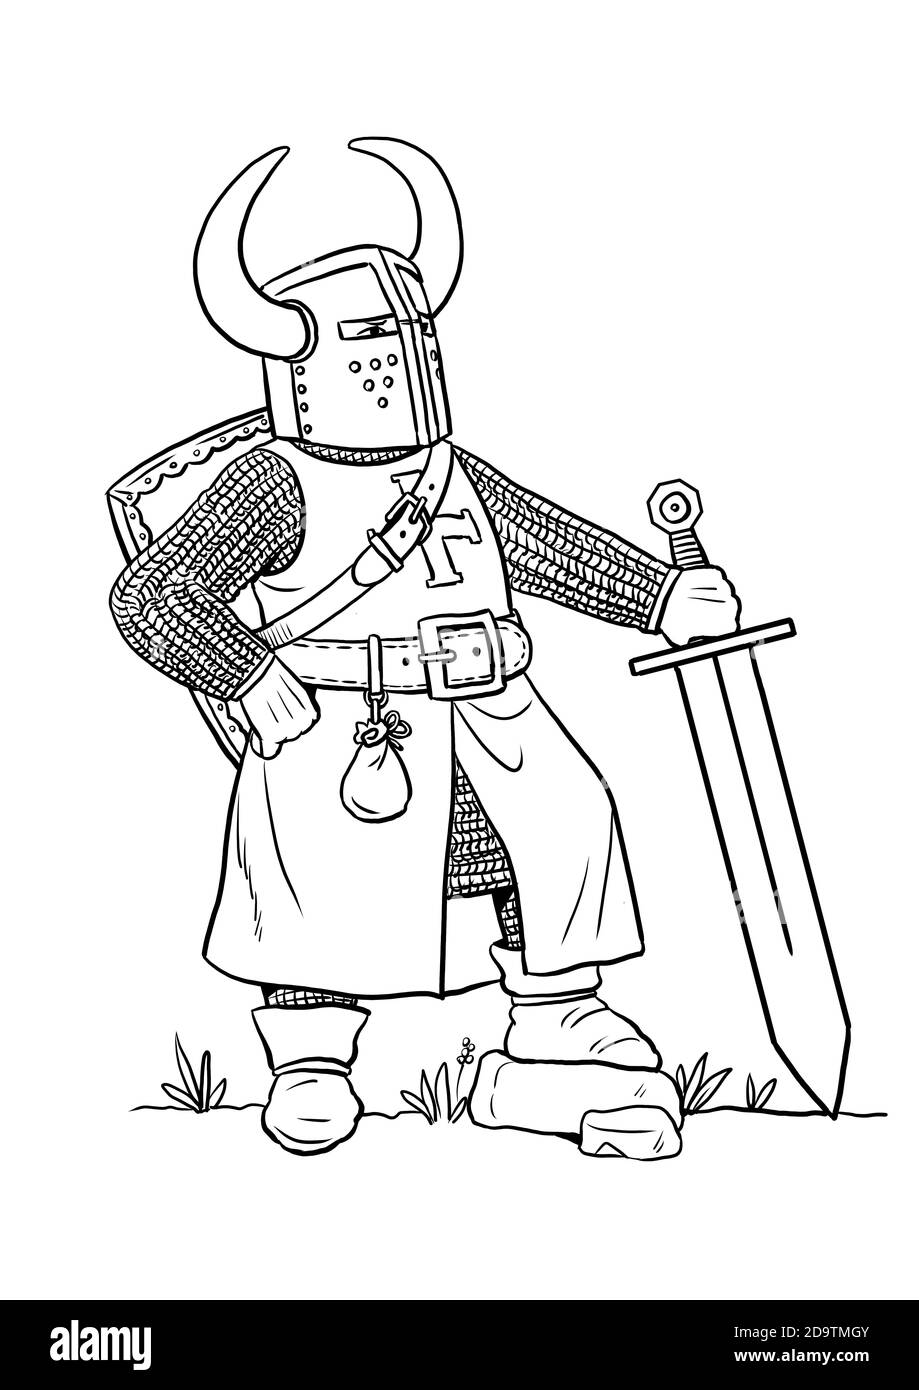 Teutonic knight for coloring. Colouring template for children. Stock Photo